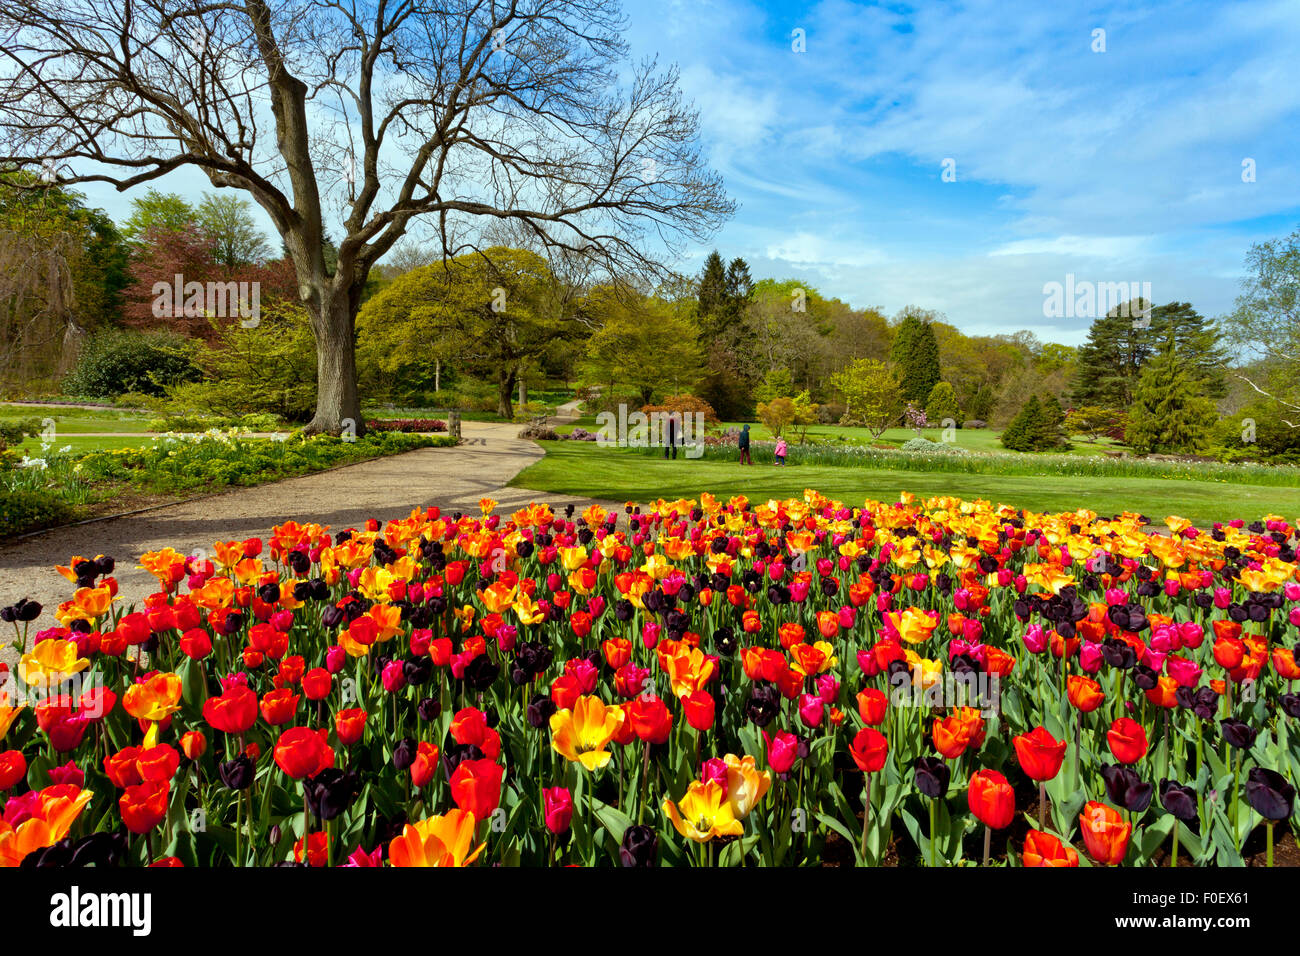 A magnificent display of colourful spring tulips at Harlow Carr Gardens, Harrogate, North Yorkshire, England, UK Stock Photo